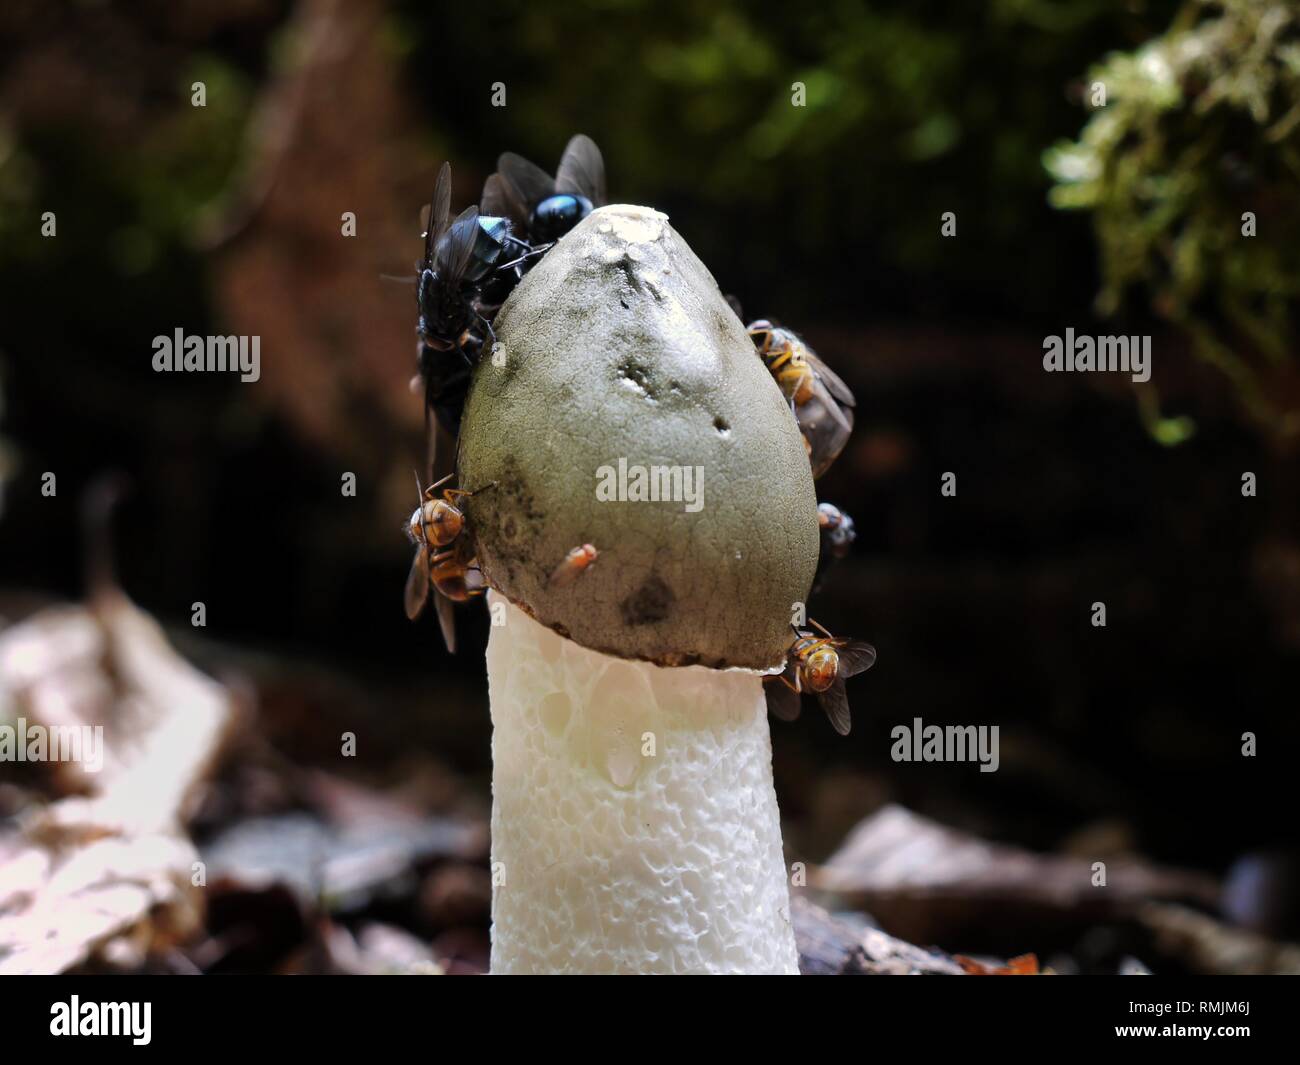 A host of flies feeding on the spore mass of a Stinkhorn Fungus, Phallus impudicus. The files are attracted by the strong smell. Stock Photo